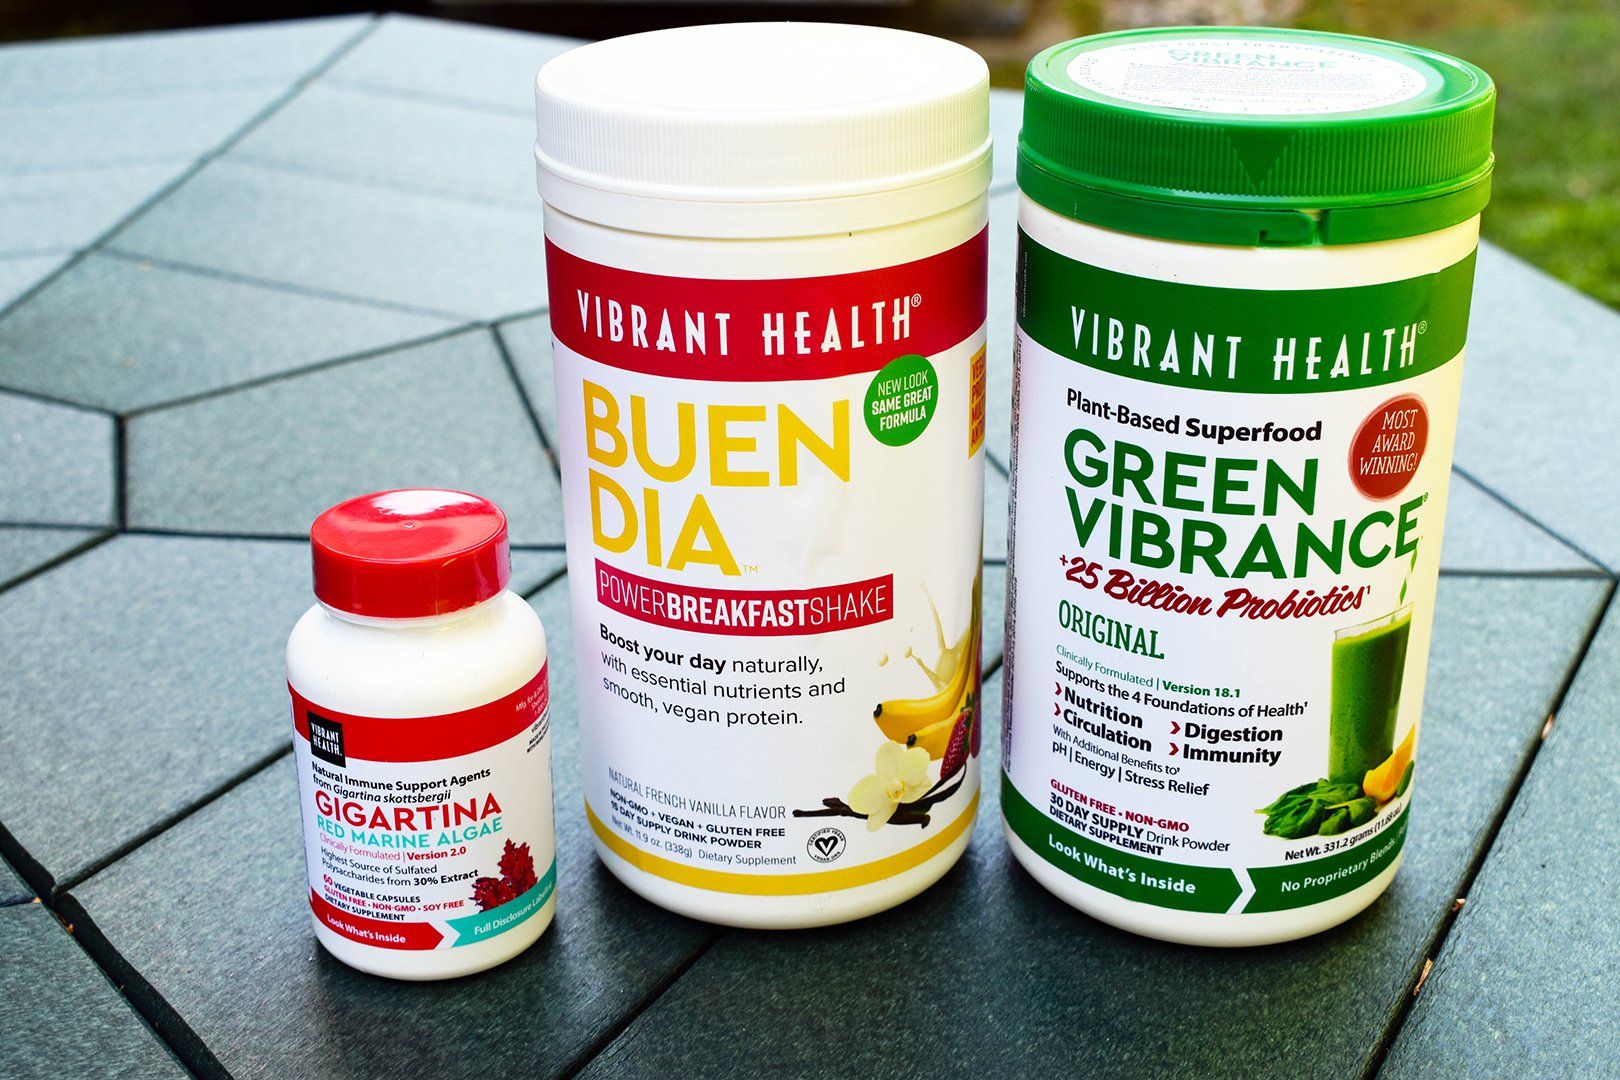 Vibrant Health's Green Vibrance, Buen Dia, and Gigartina on table outside